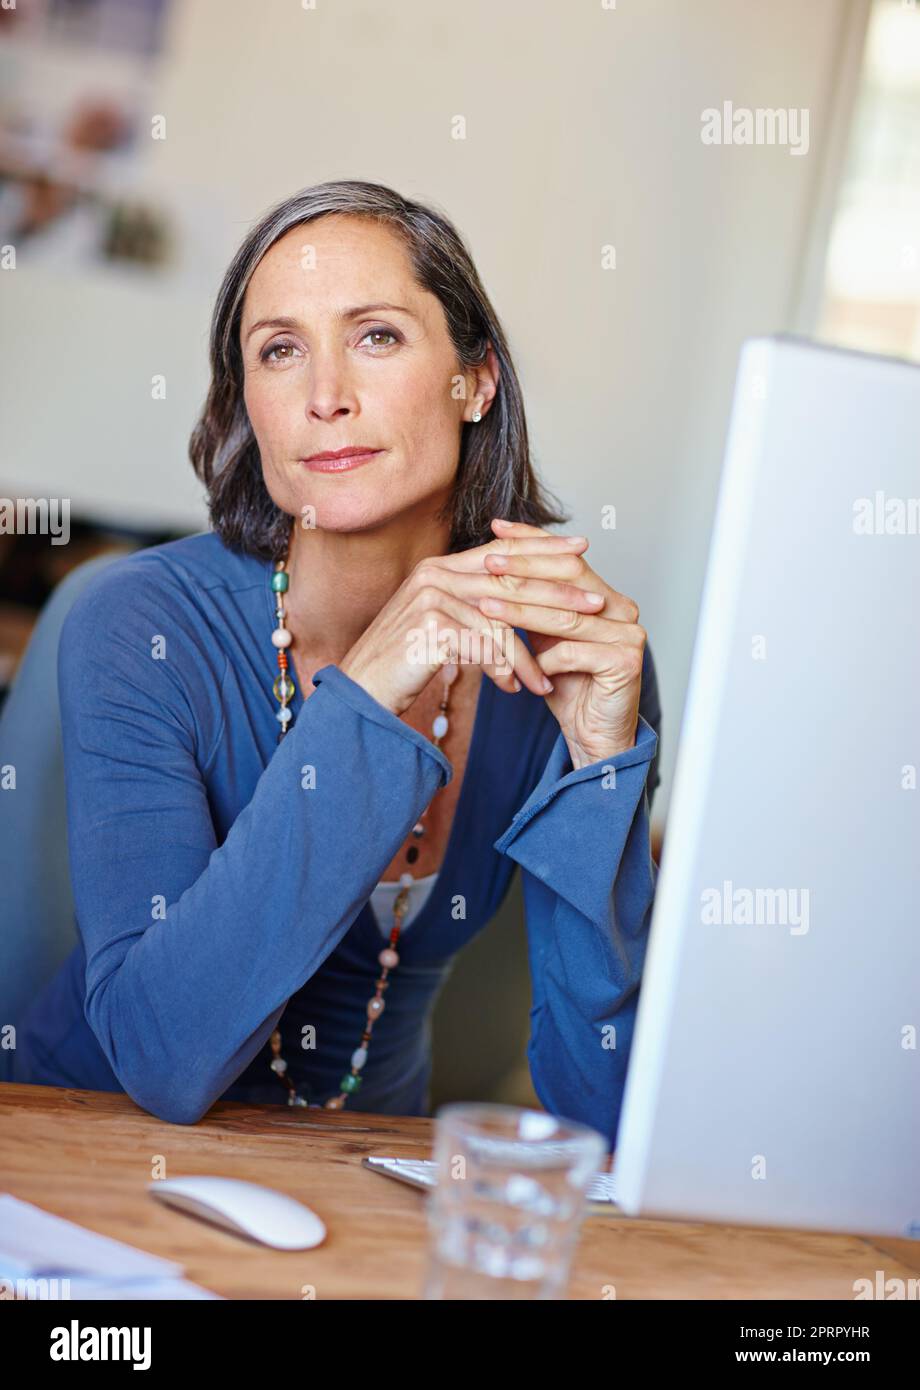 Shes good at what she does. Portrait of a mature female design professional sitting at her office desk. Stock Photo